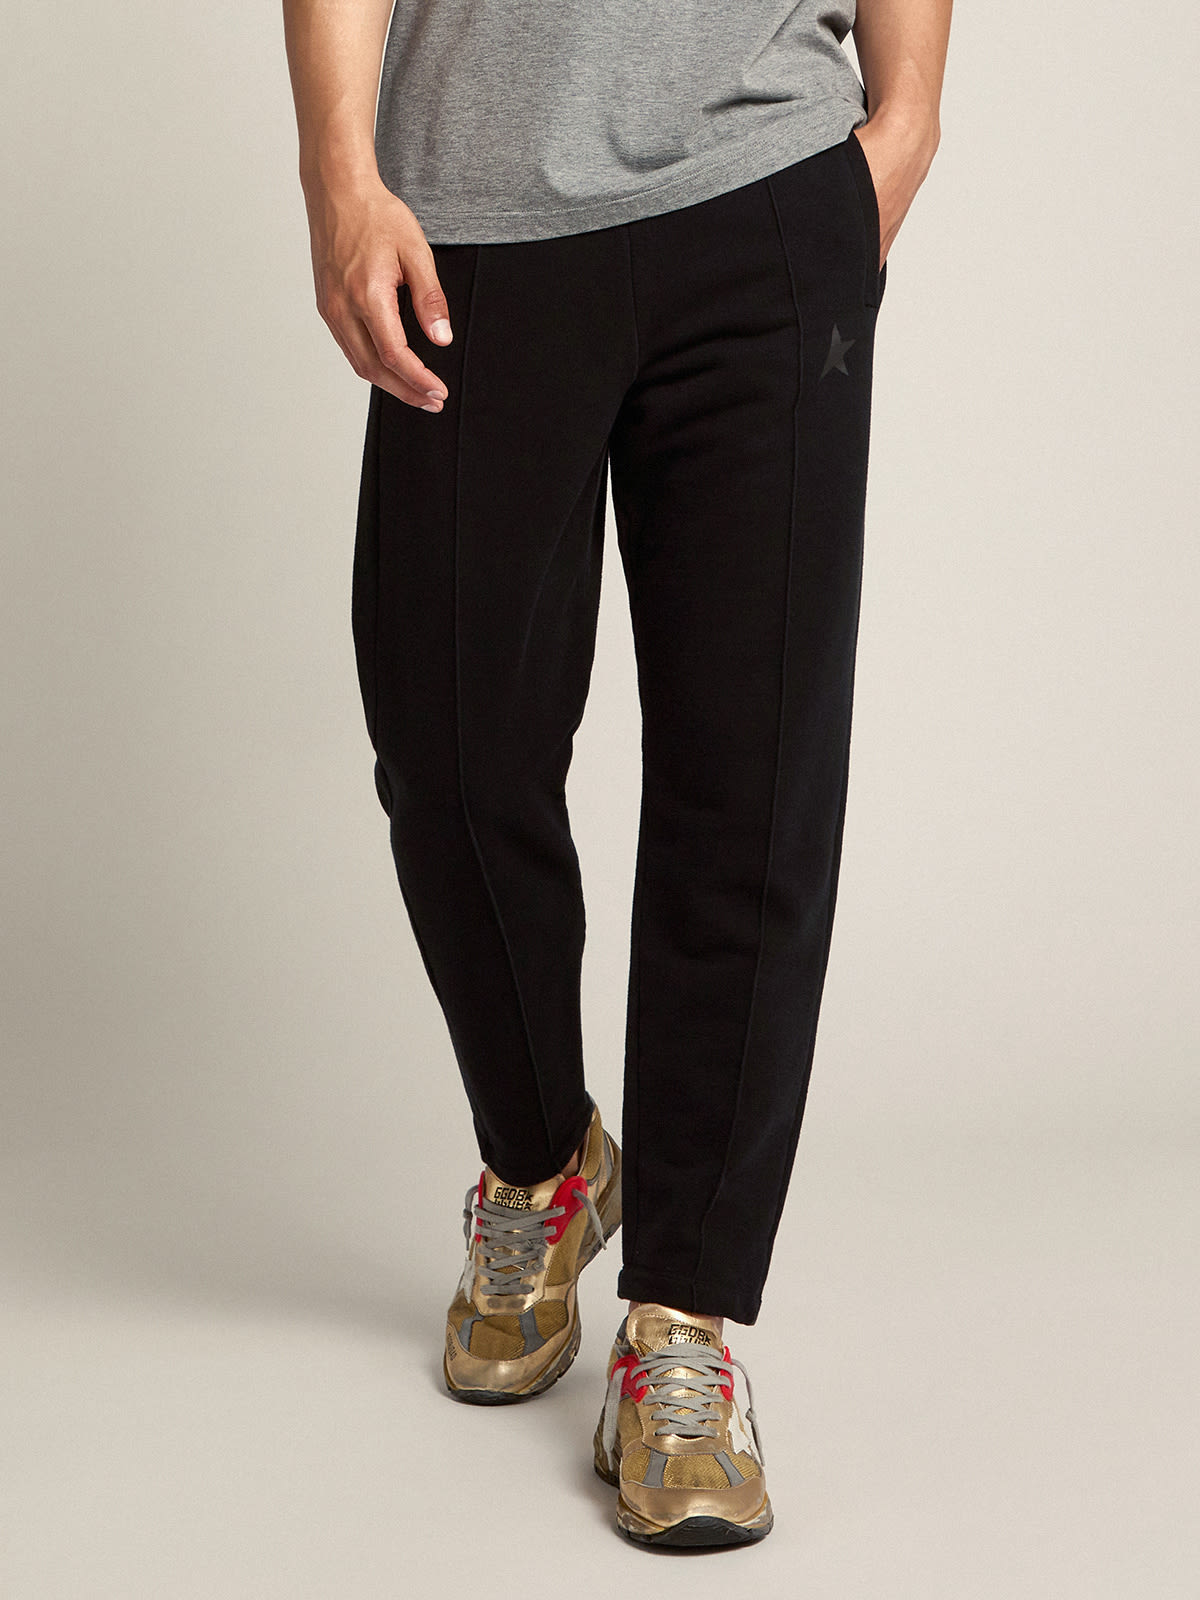 Black Doro Star Collection jogging pants with tone-on-tone star on the front